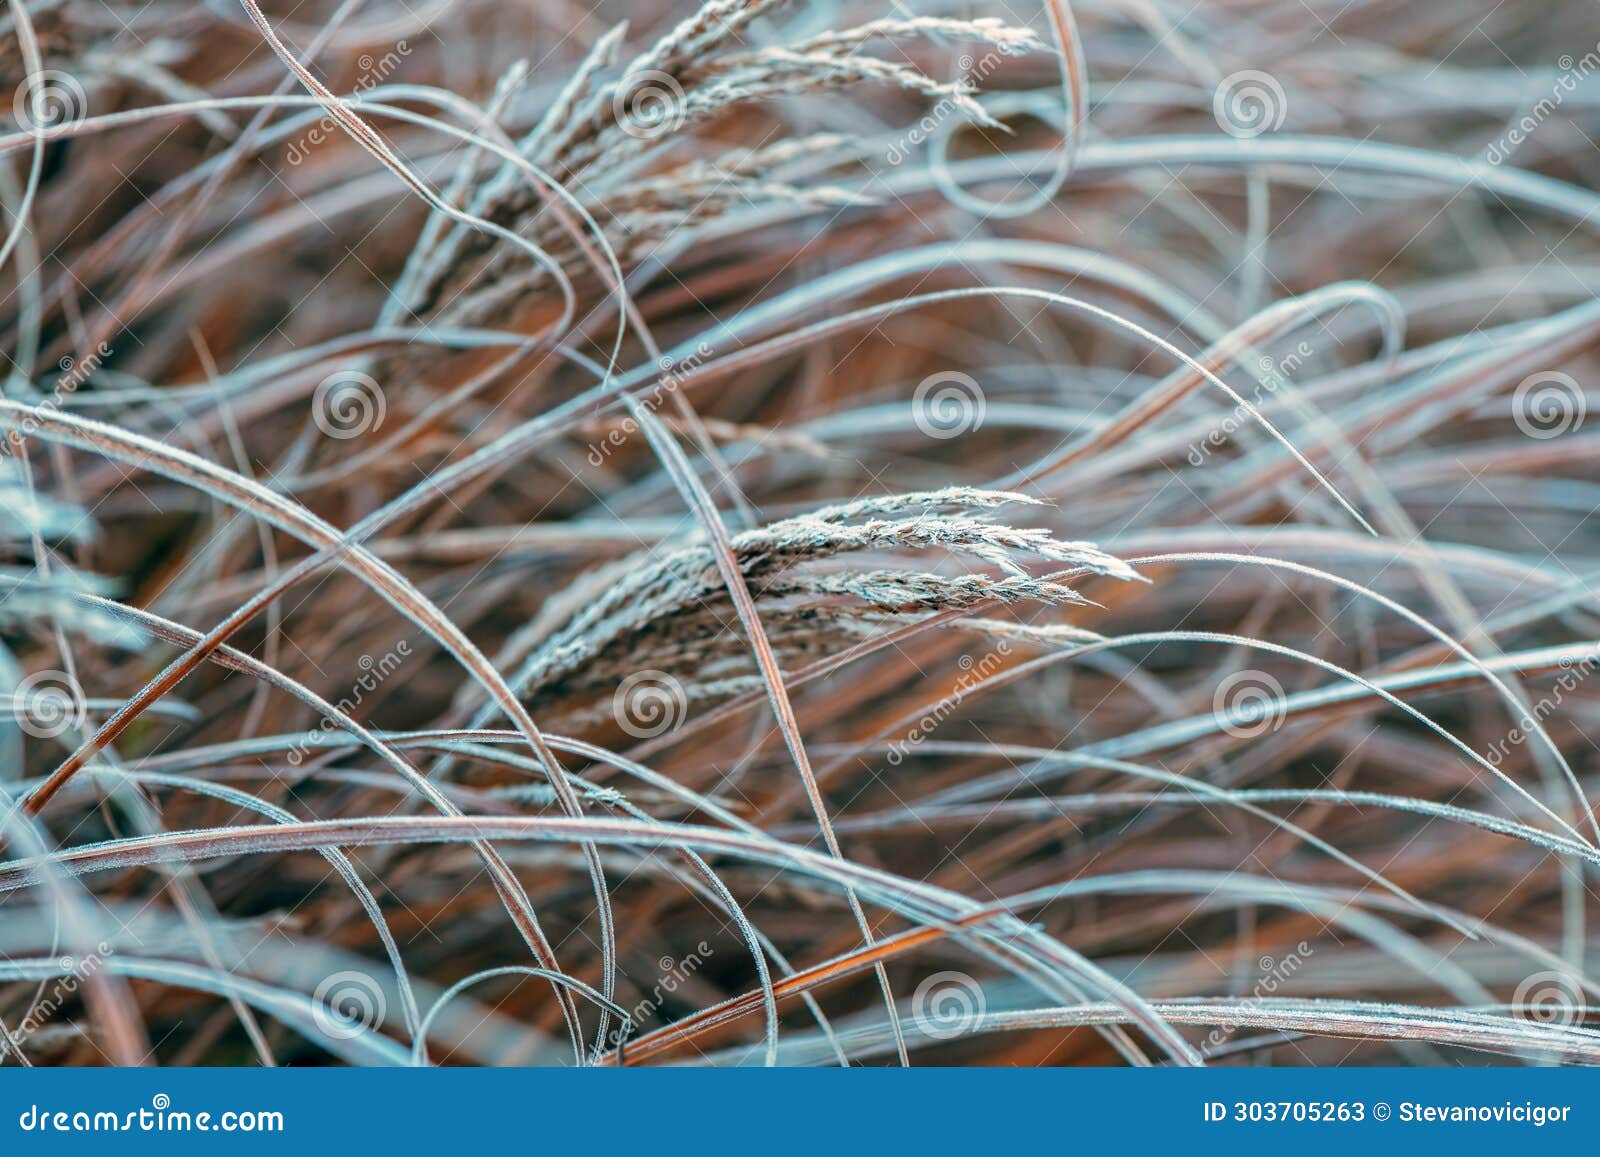 ice and frost on uncultivated meadow plants in cold foggy winter morning